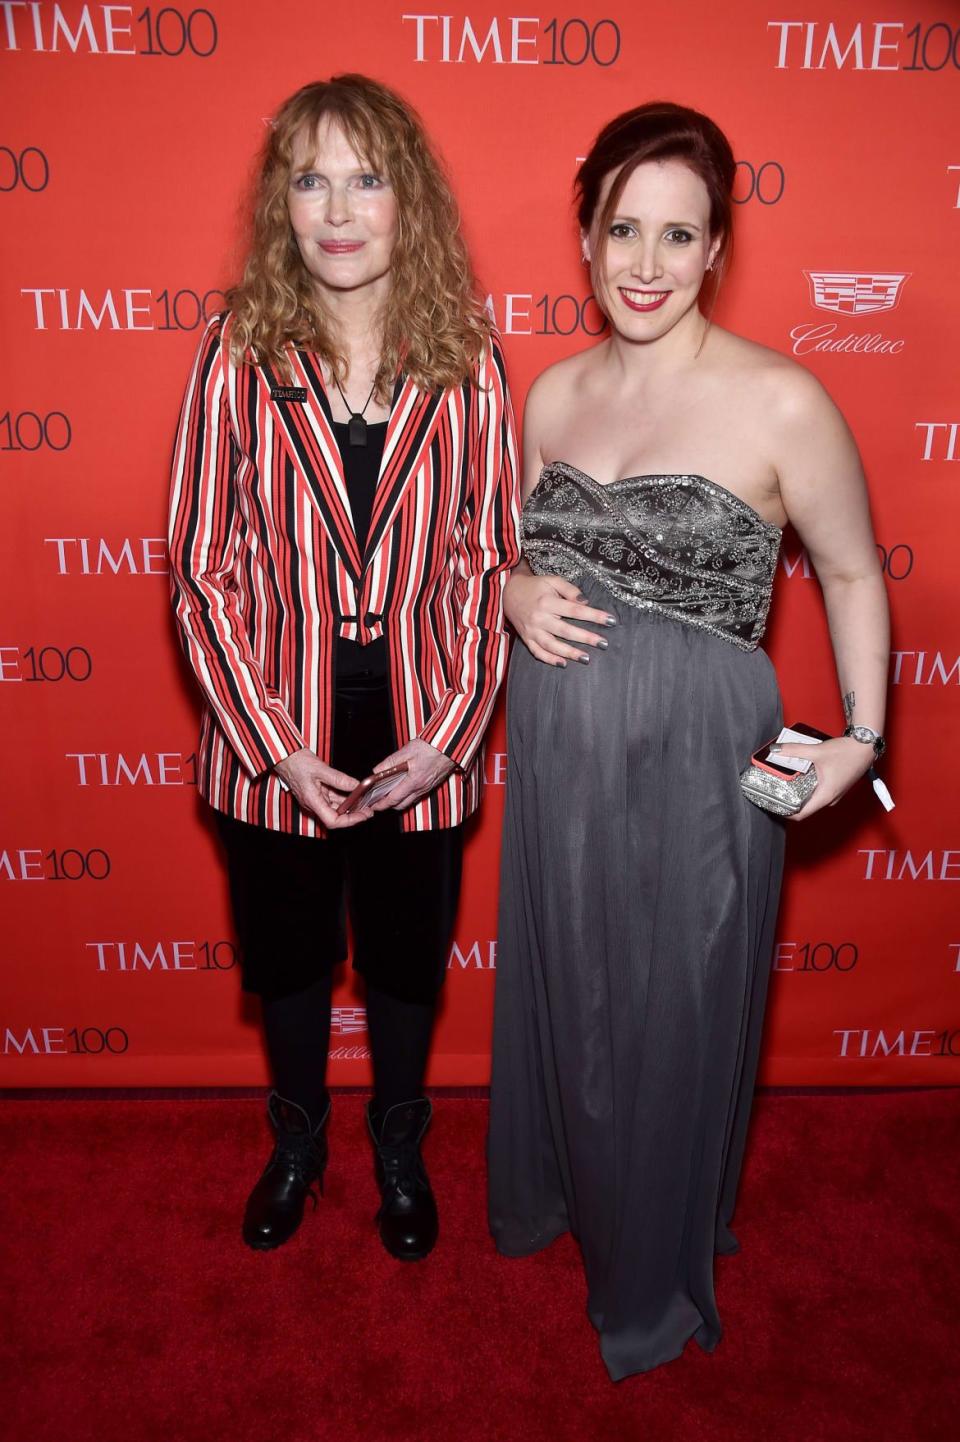 <div class="inline-image__caption"><p>Mia Farrow and Dylan Farrow attend 2016 Time 100 Gala, Time's Most Influential People In The World red carpet at Jazz At Lincoln Center at the Times Warner Center on April 26, 2016, in New York City.</p></div> <div class="inline-image__credit">Dimitrios Kambouris/Getty</div>